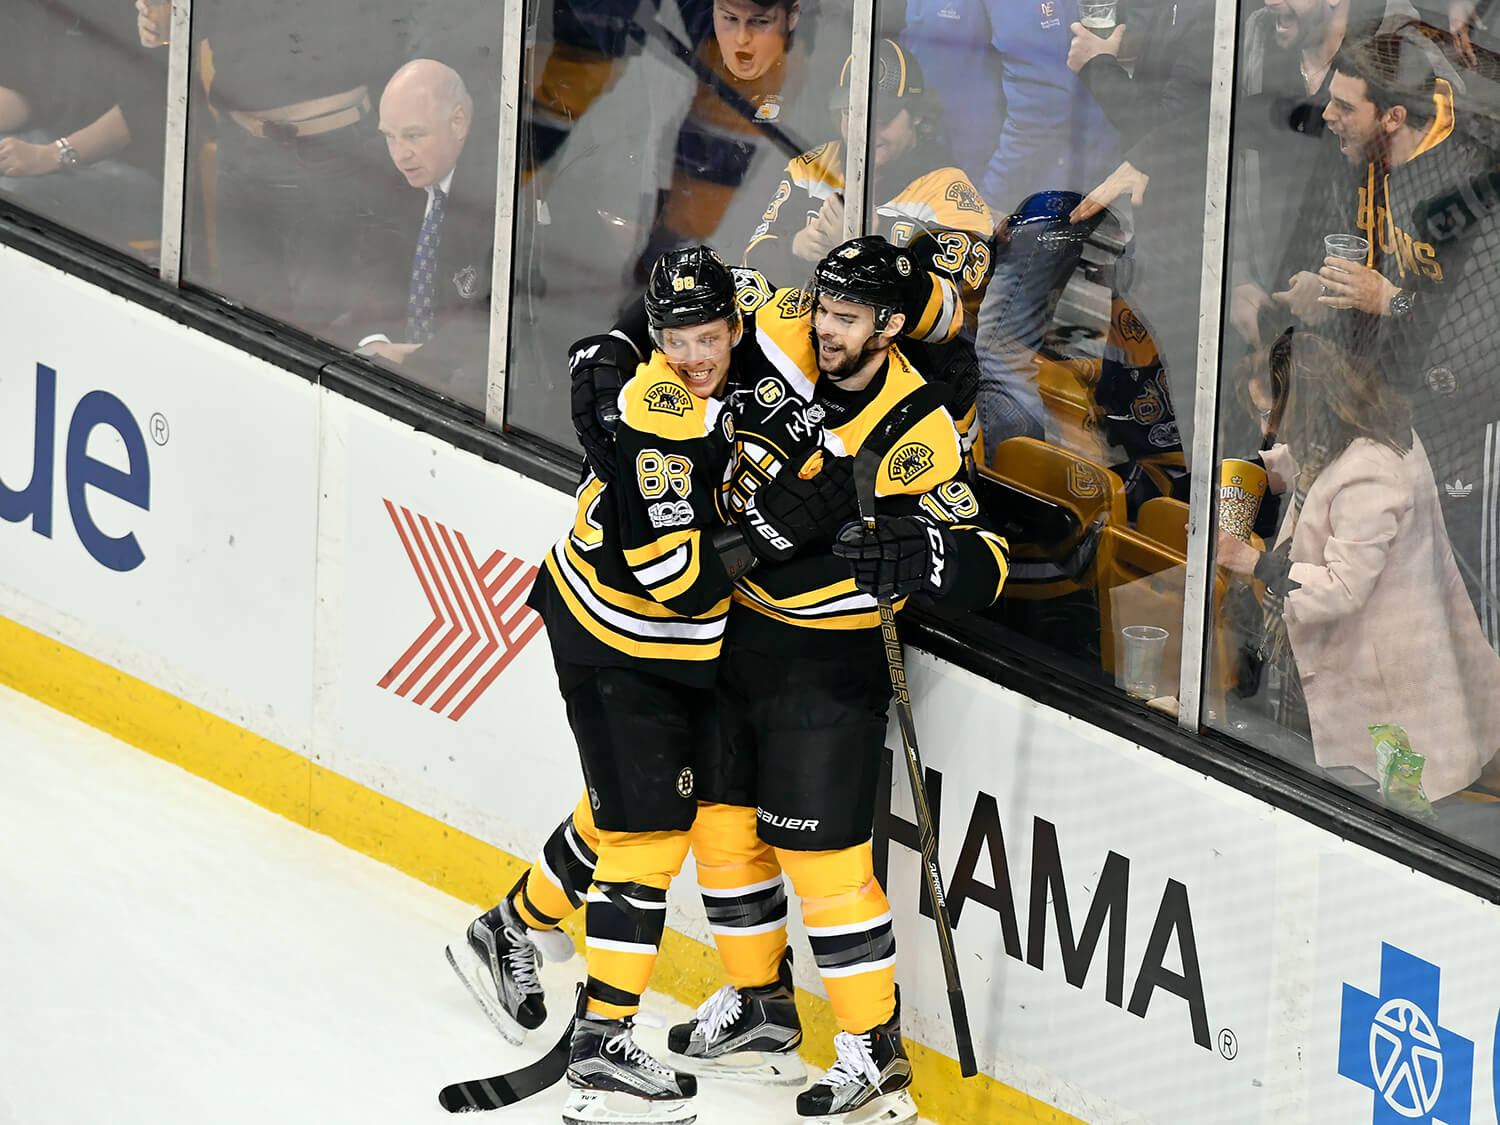 Stafford Nets Game Winner In Final Seconds Of Bruins Victory Over Flyers